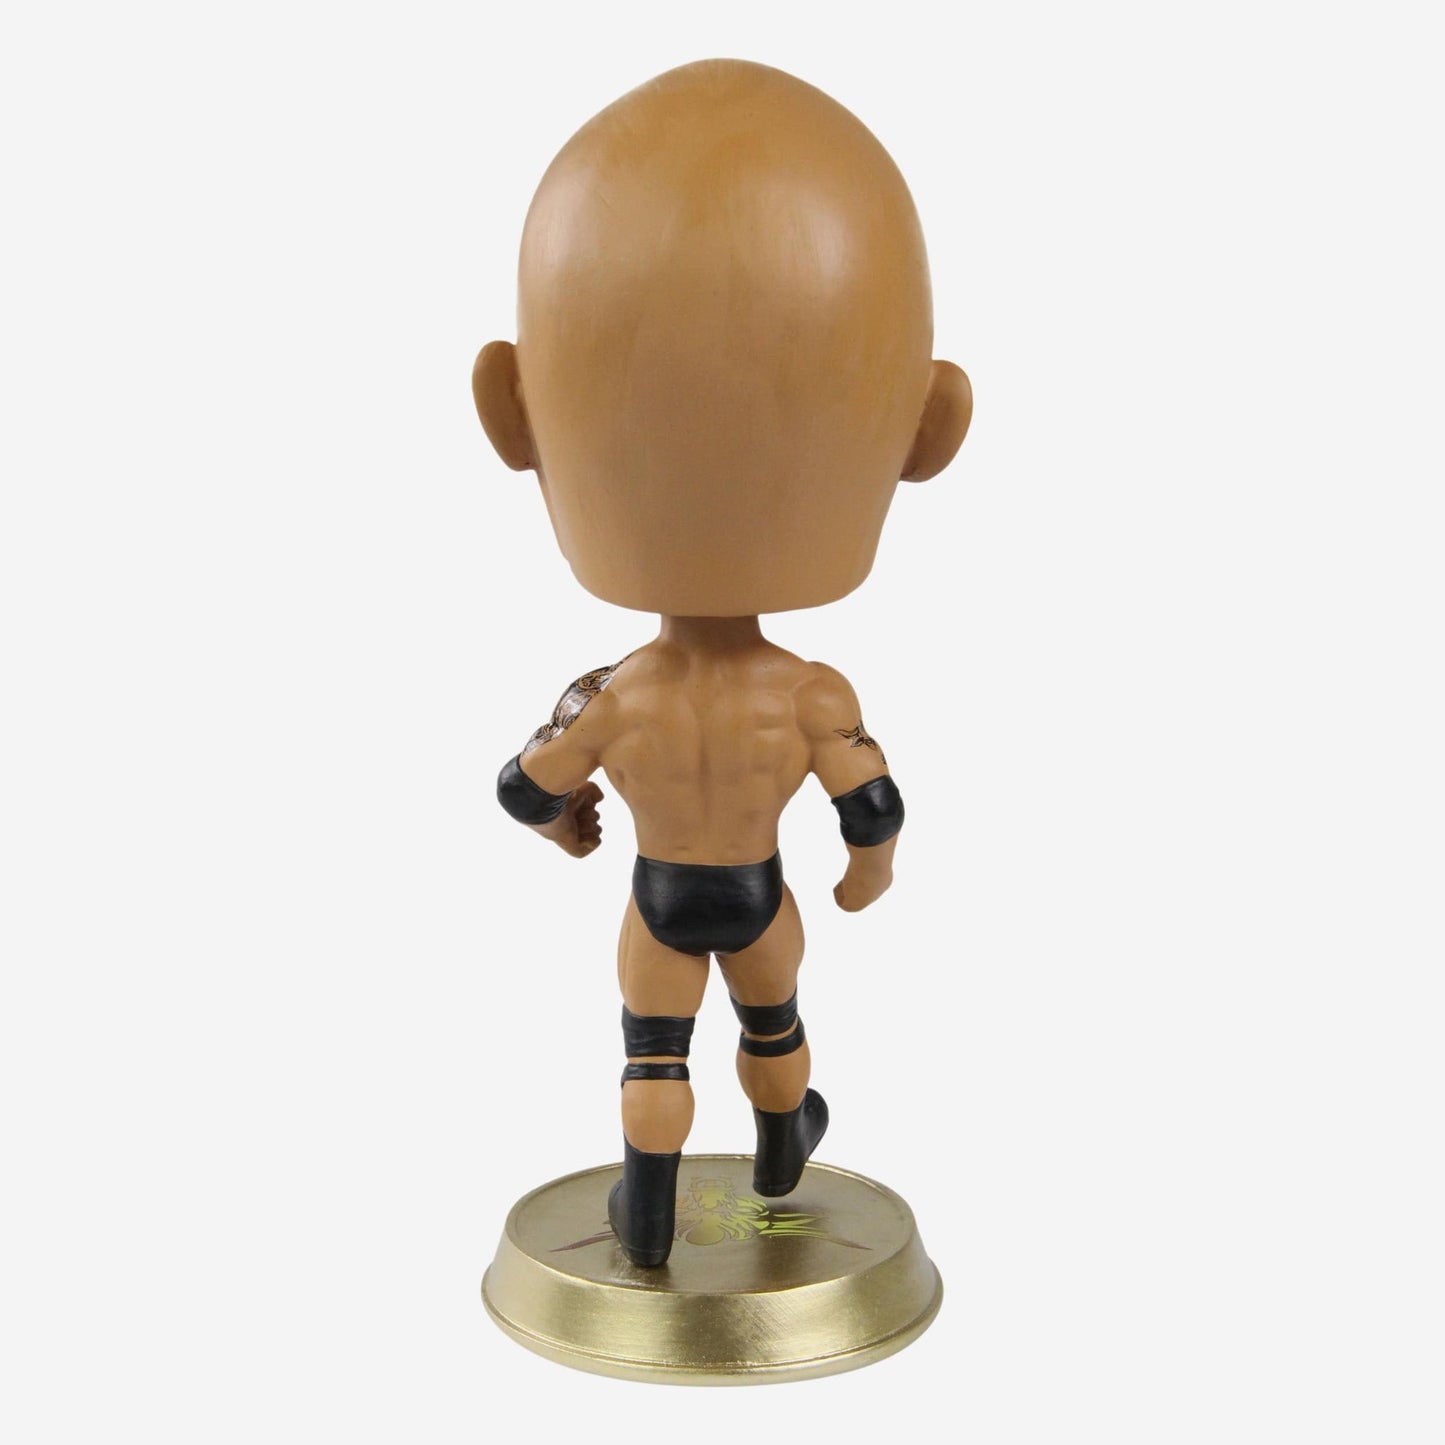 2023 WWE FOCO Bigheads Limited Edition The Rock [Variant]